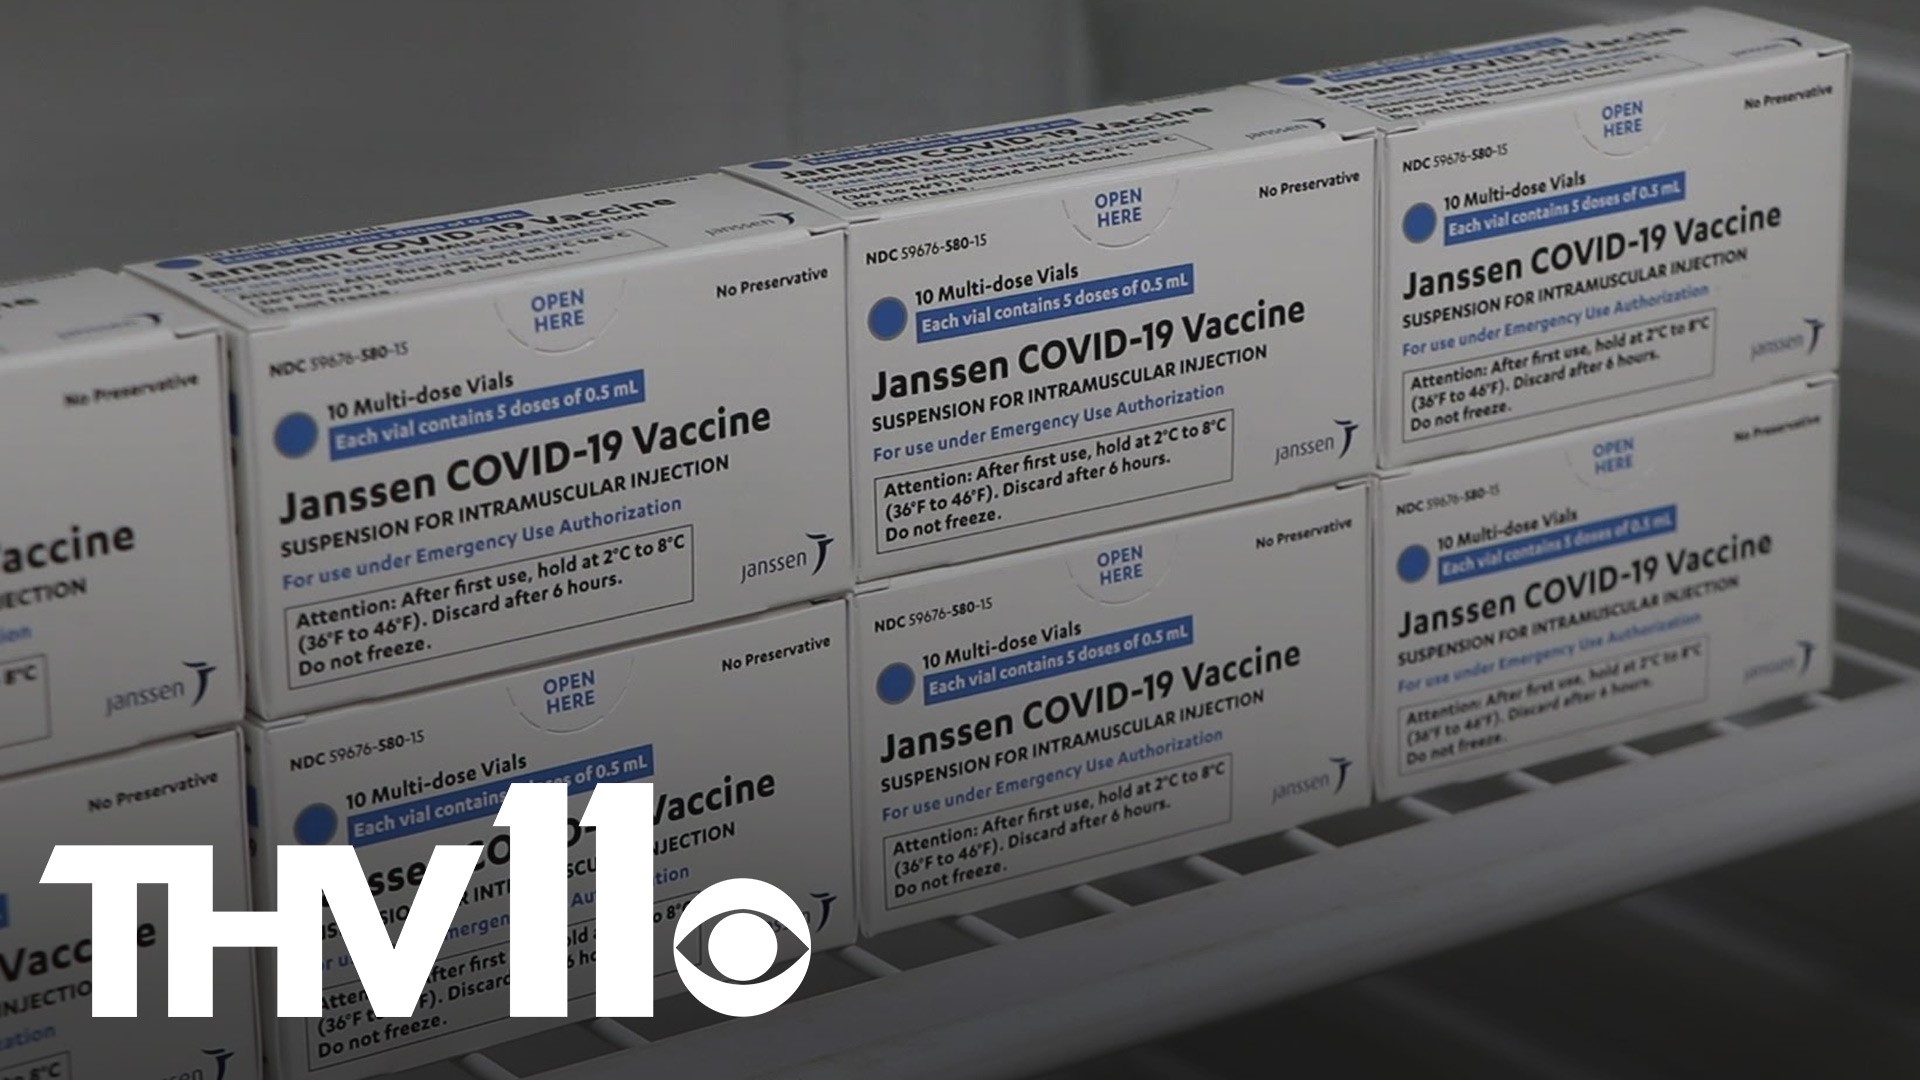 It's been almost a week since the Johnson & Johnson vaccine arrived in Arkansas and many are wondering where they can get their hands on the one dose shot.